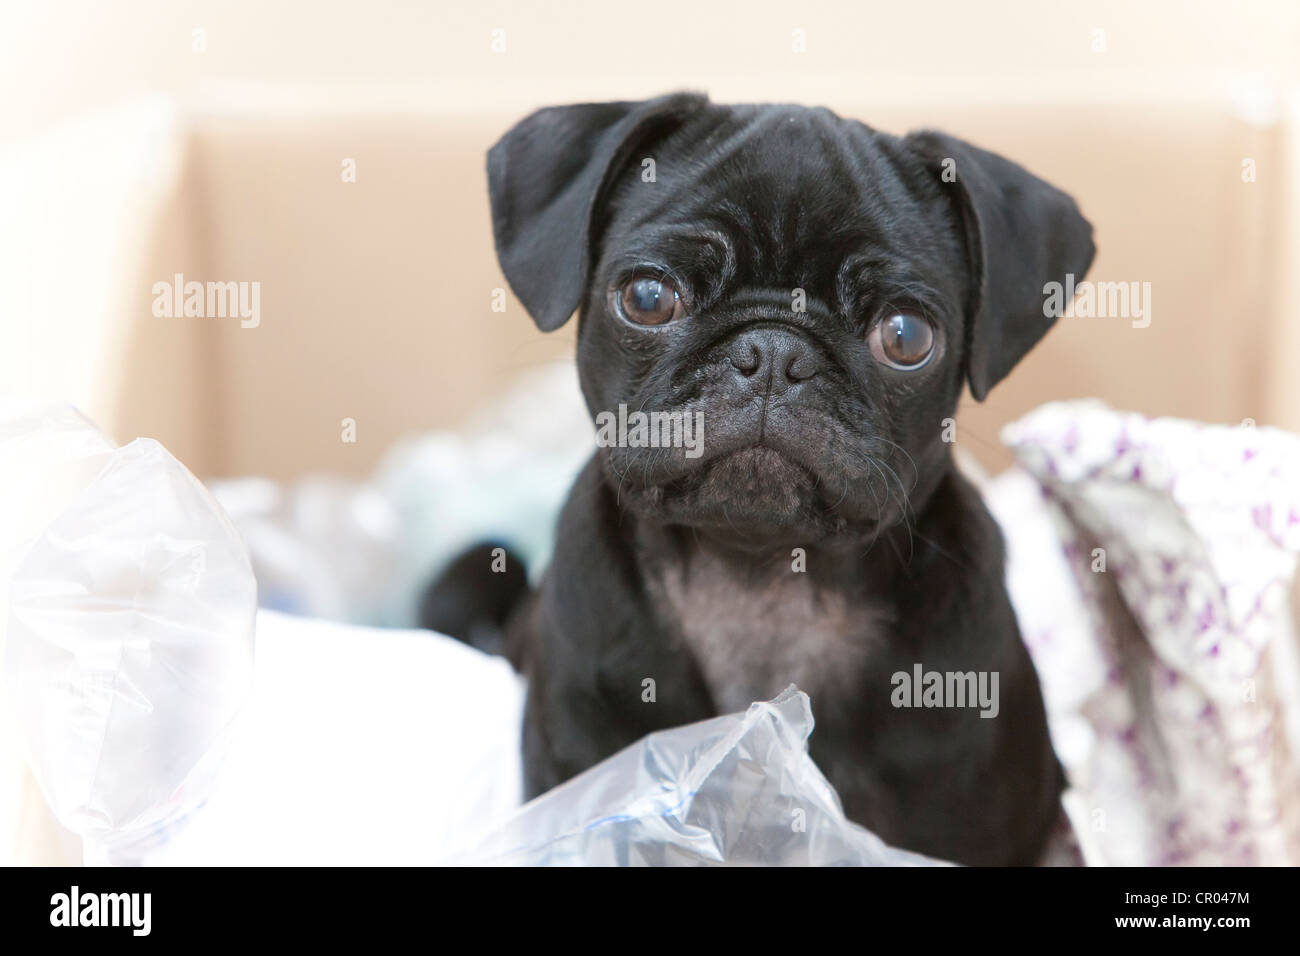 6-month-old pug puppy in a box Stock Photo - Alamy